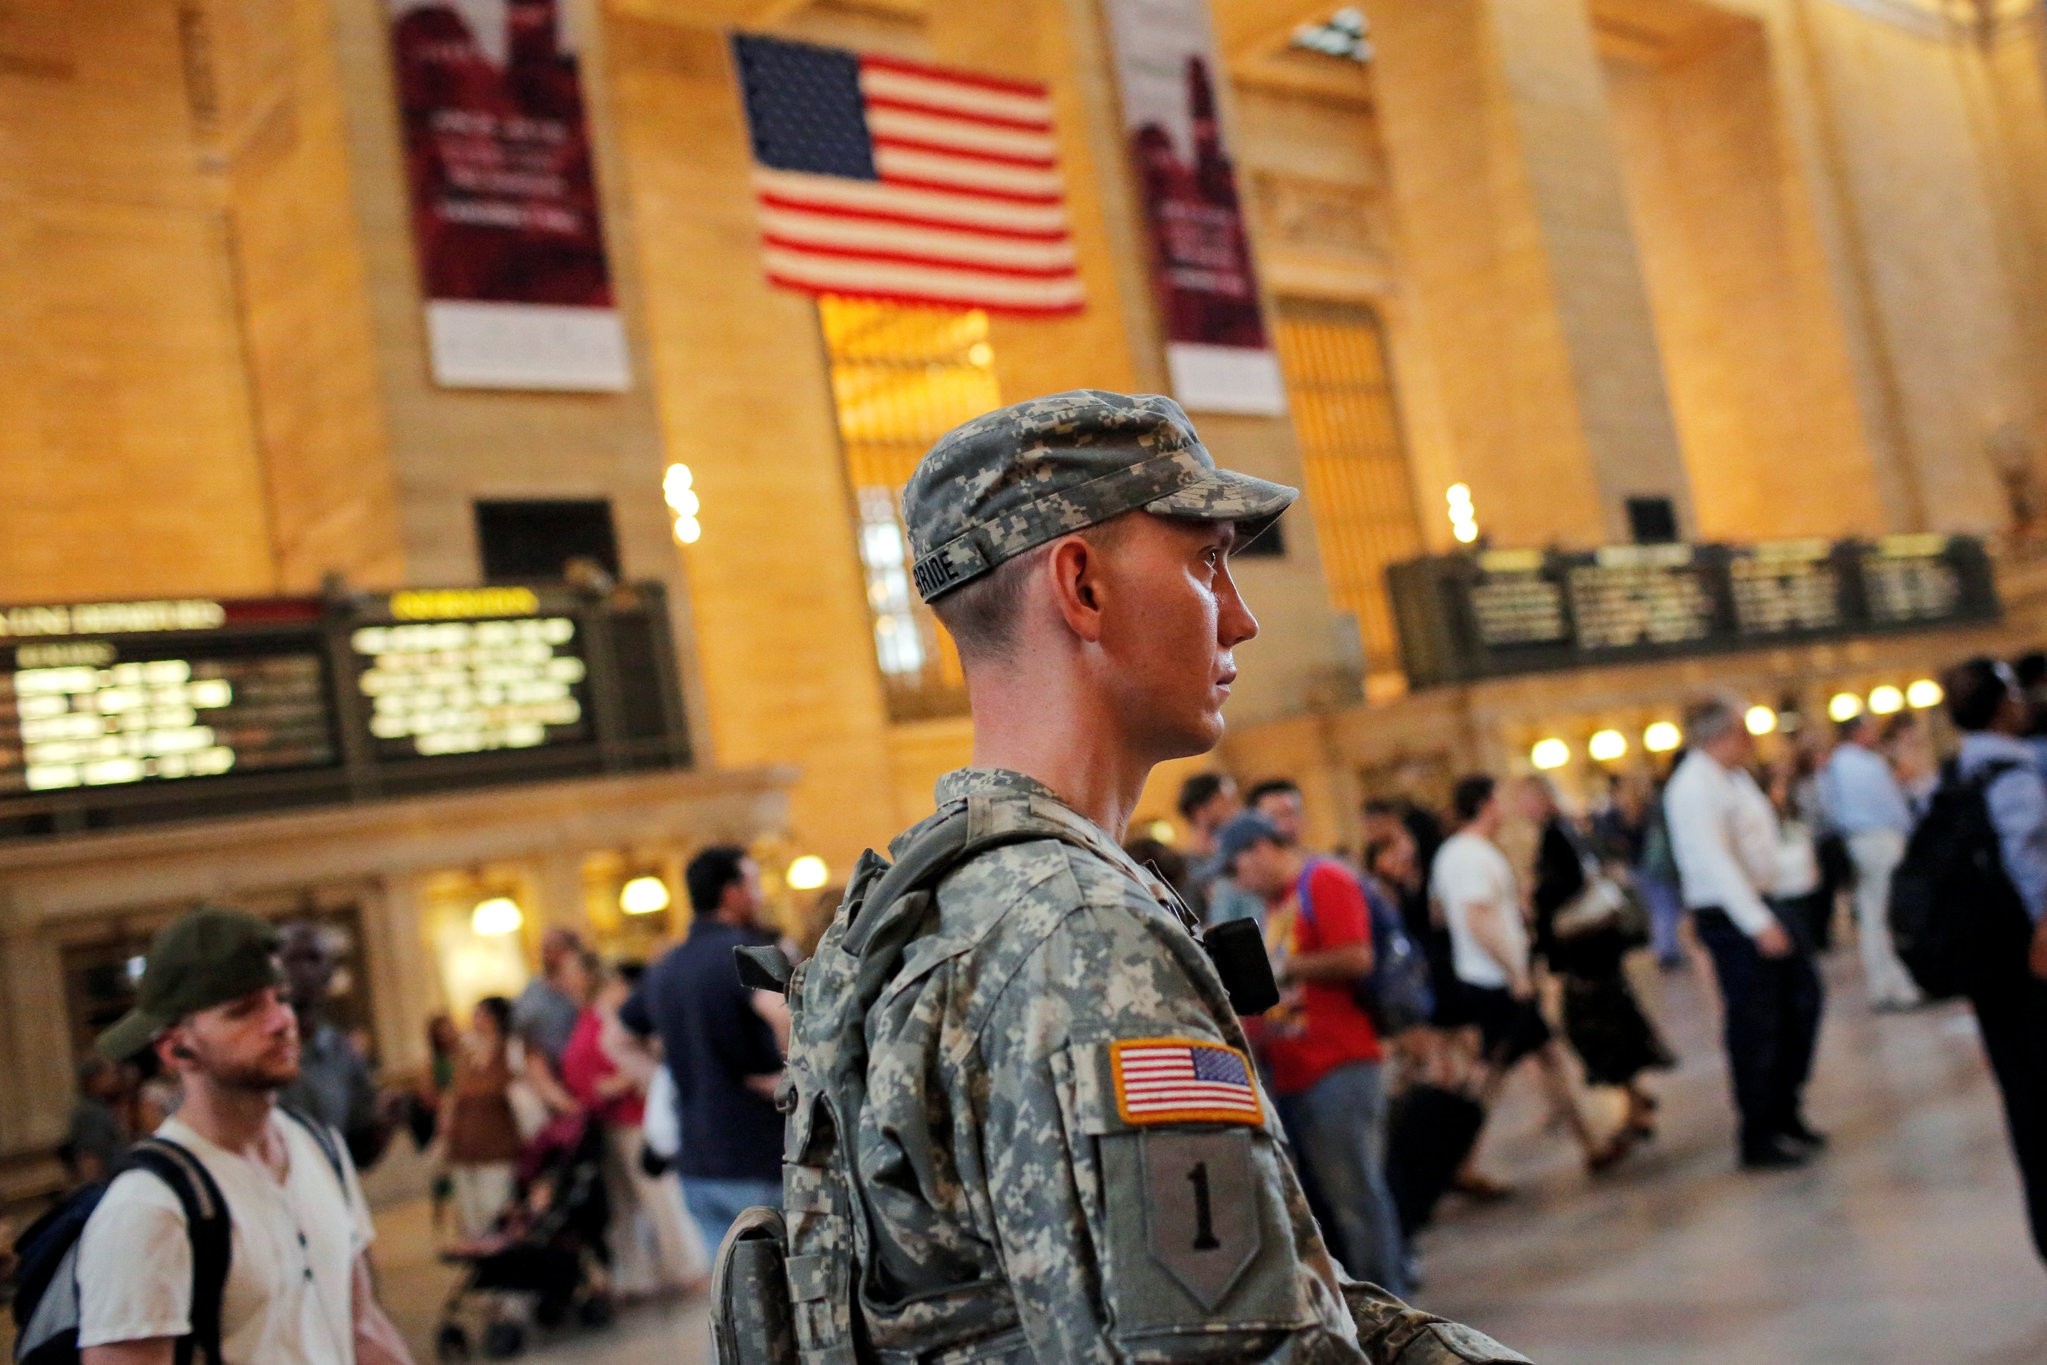 A member of the U.S. Army National Guard monitors commuters at Grand Central Station as security increases leading up to the Fourth of July weekend in Manhattan, New York, U.S., July 1, 2016. (REUTERS Photo)